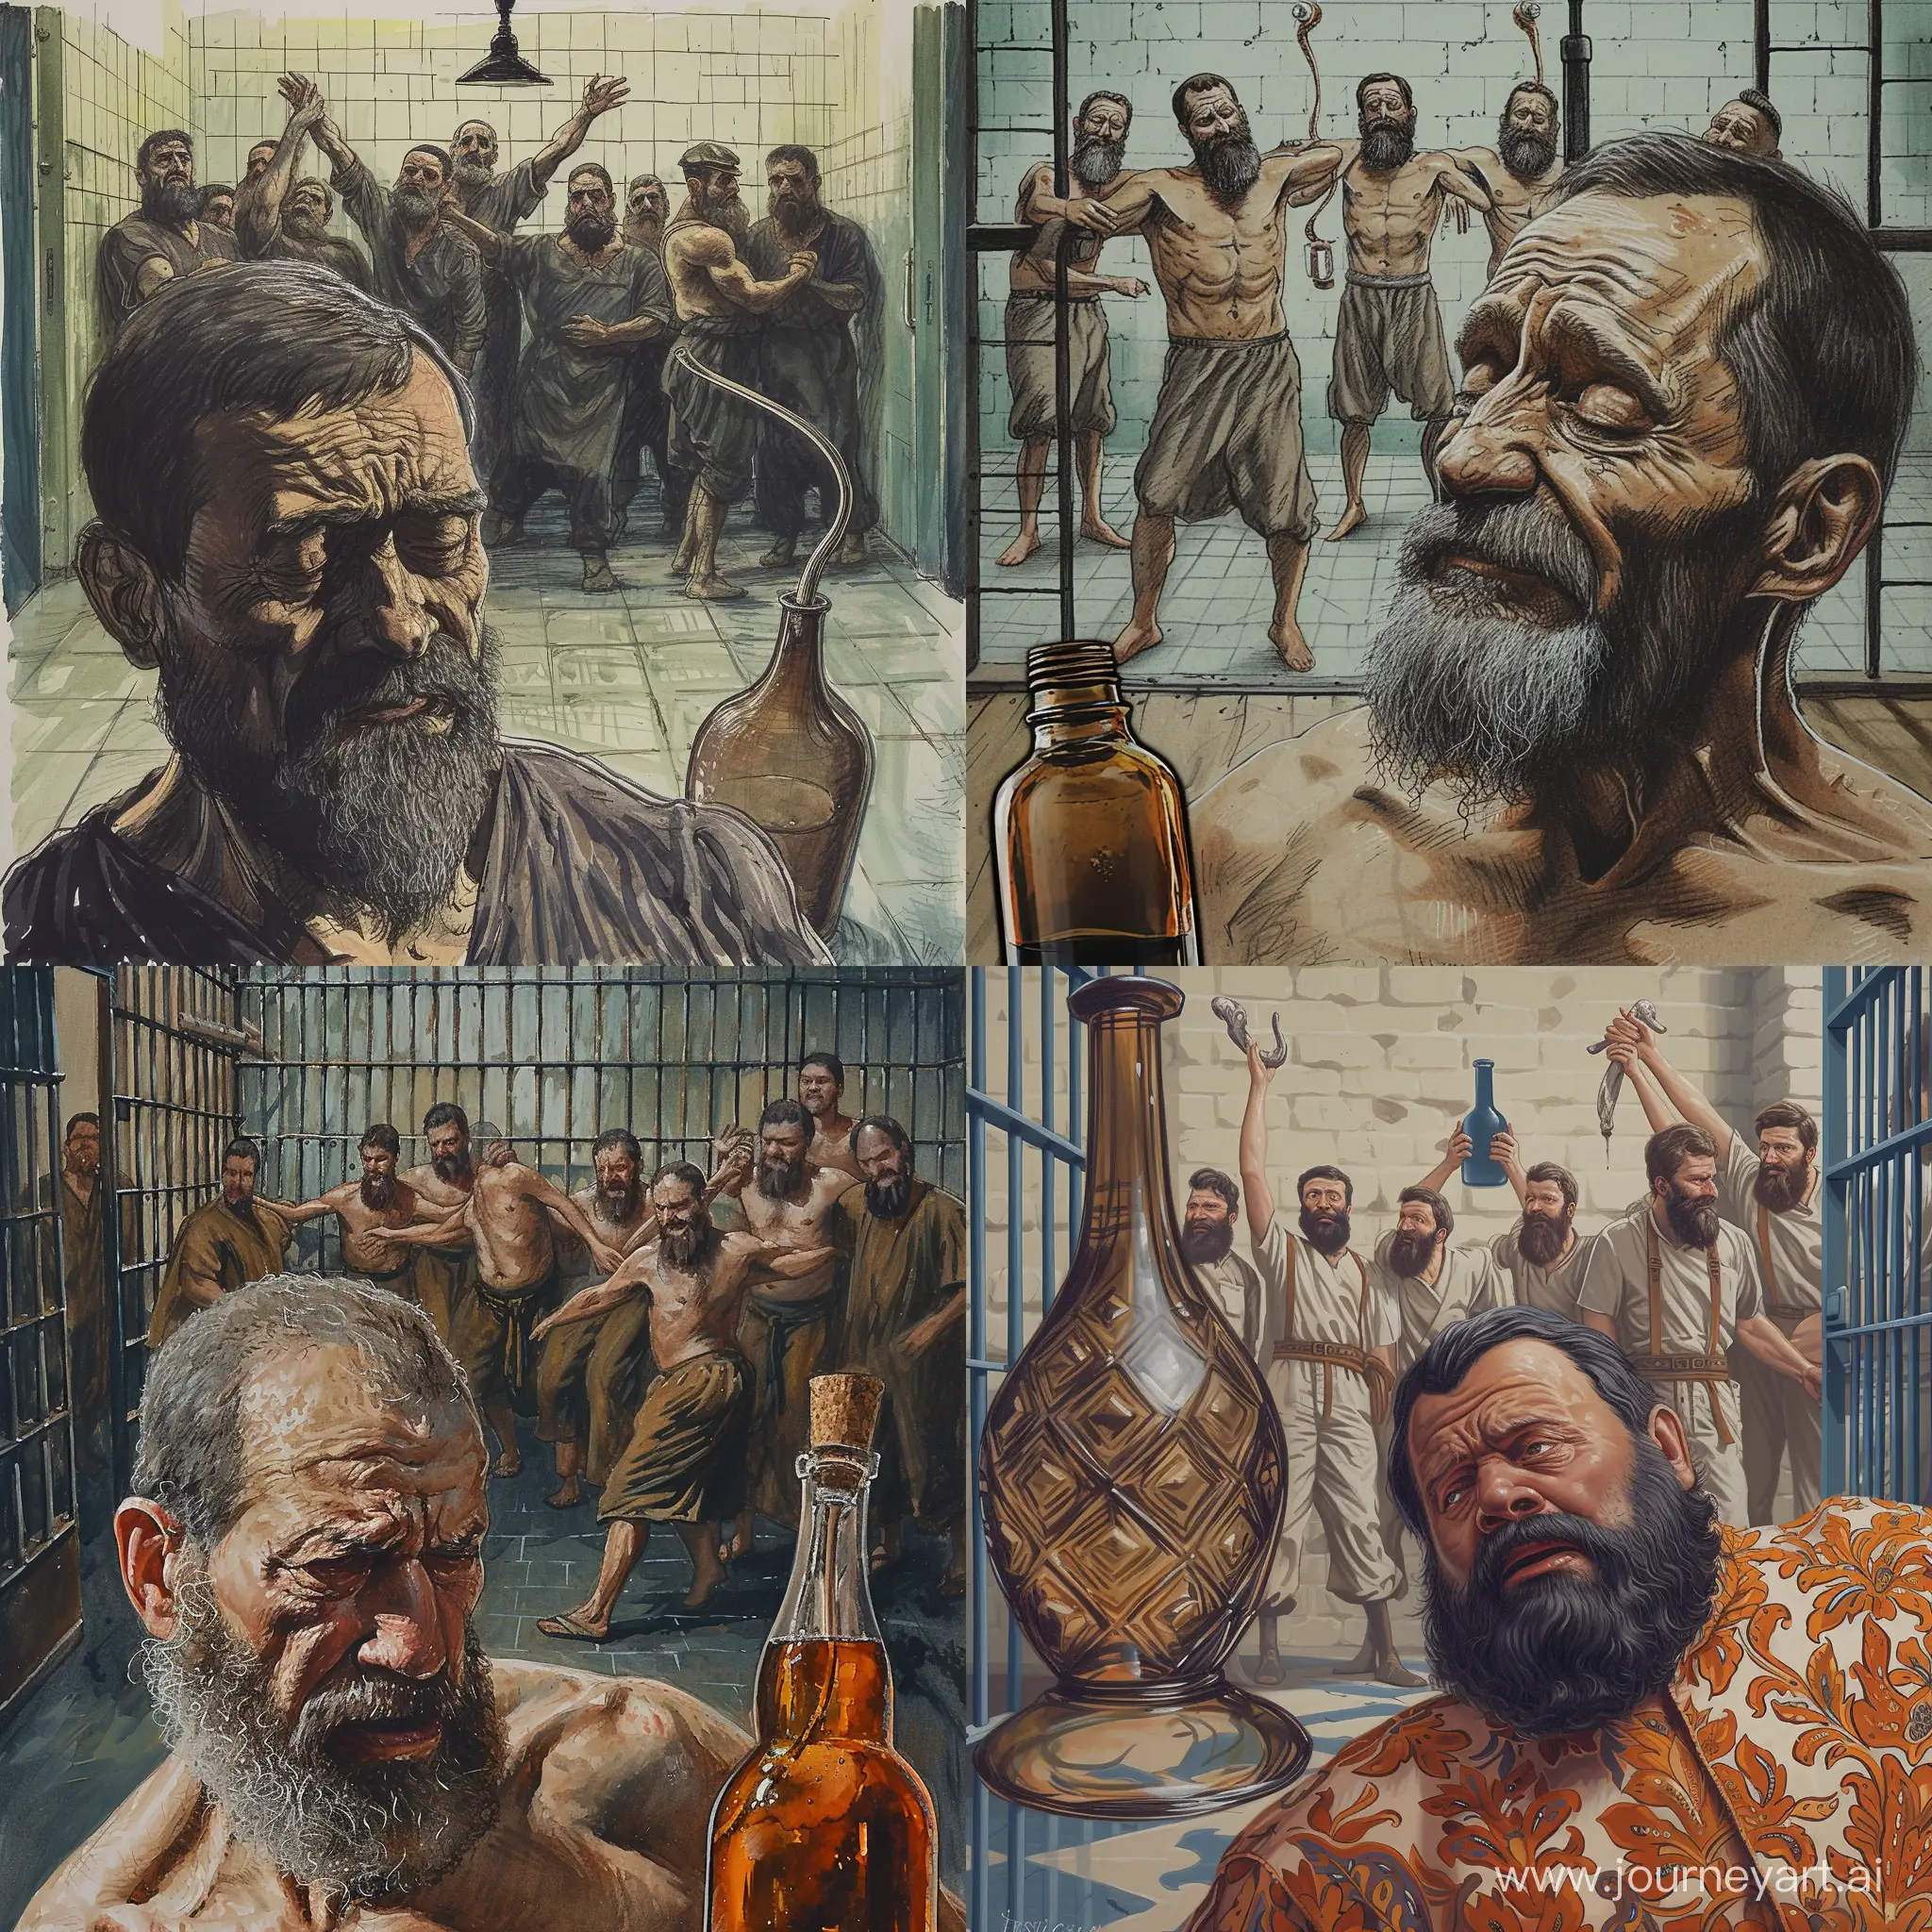 draw a sad Girkin in a prison cell with cheerful bearded Caucasian men dancing the bream, and in front of Girkin a bottle with a long neck